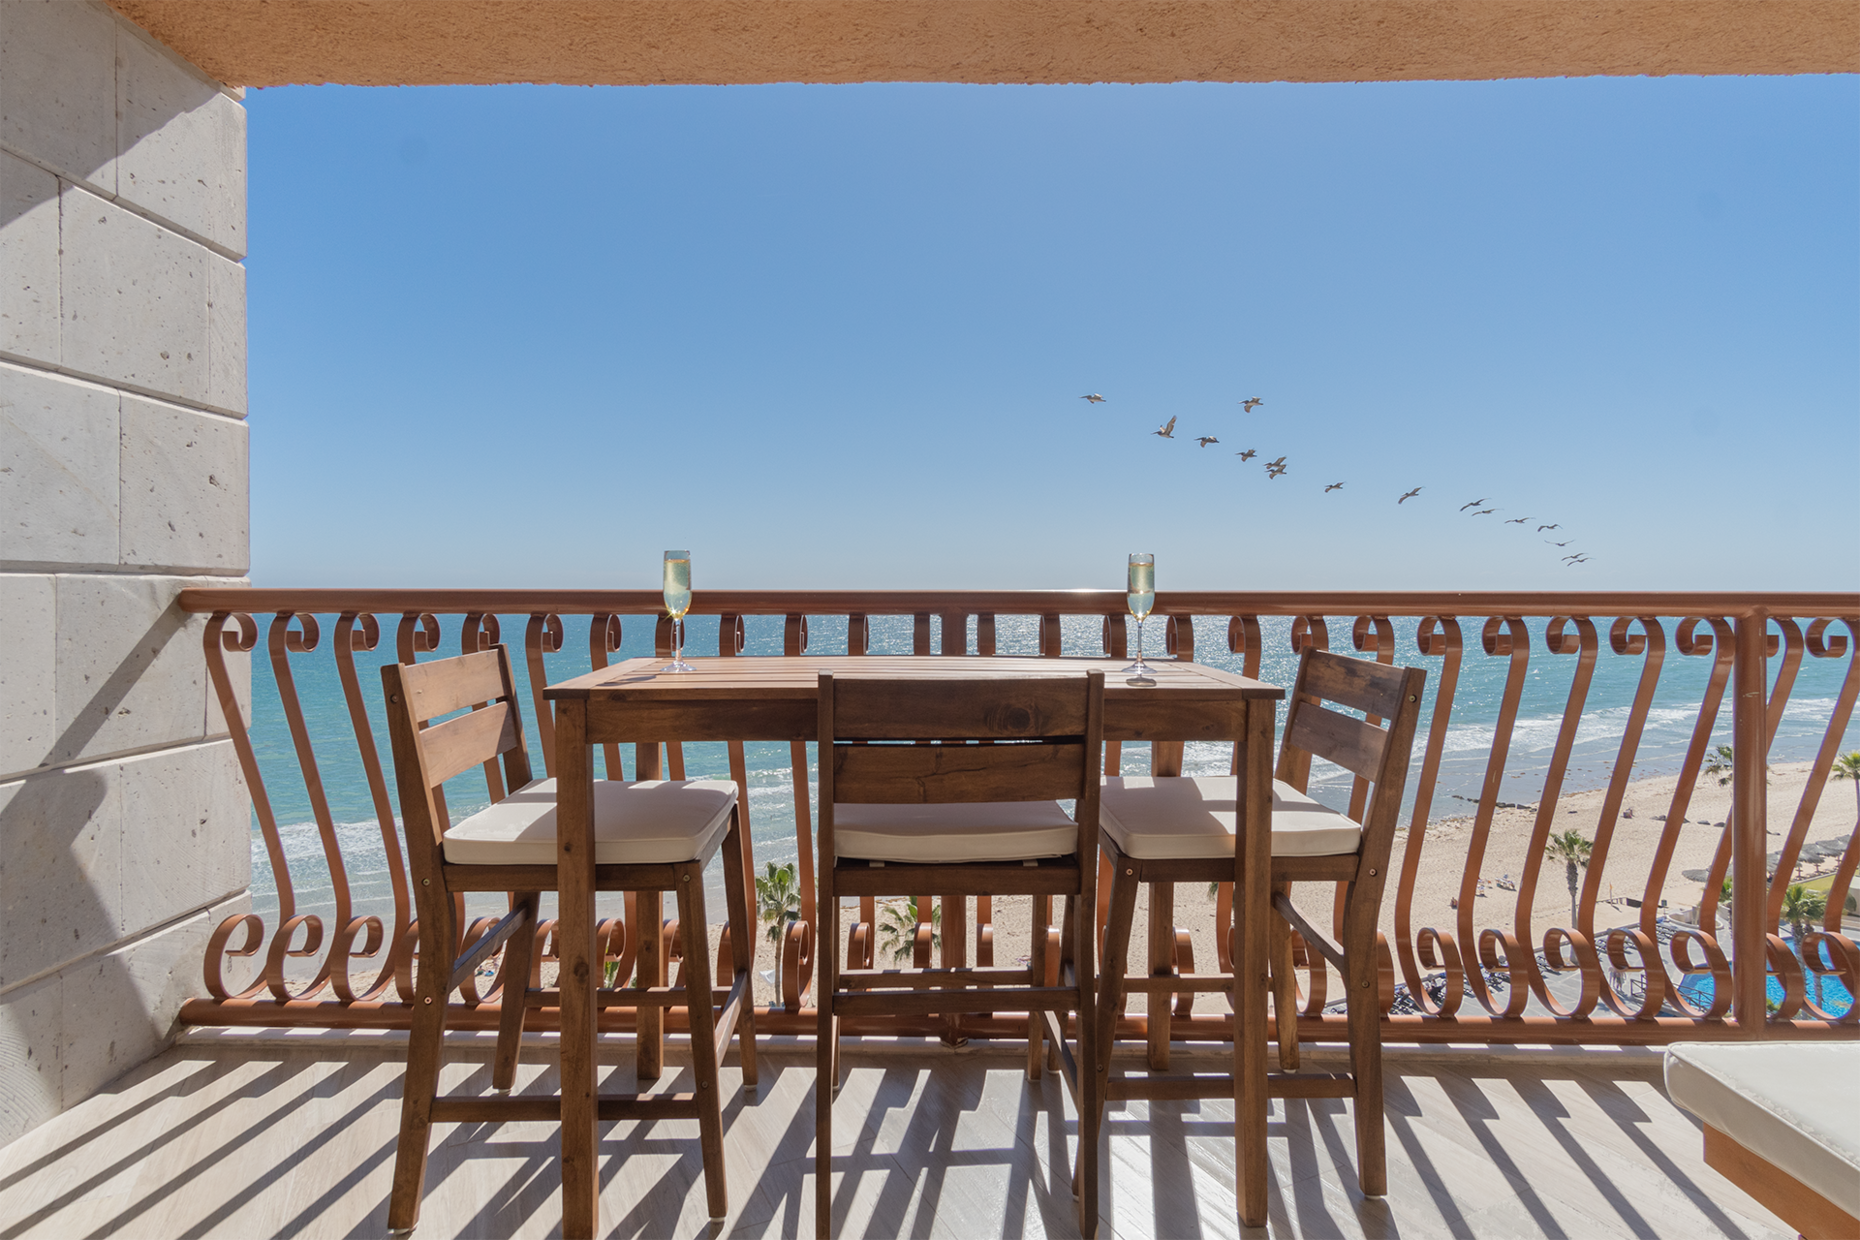 Birds fly by as you enjoy the beach from up above.